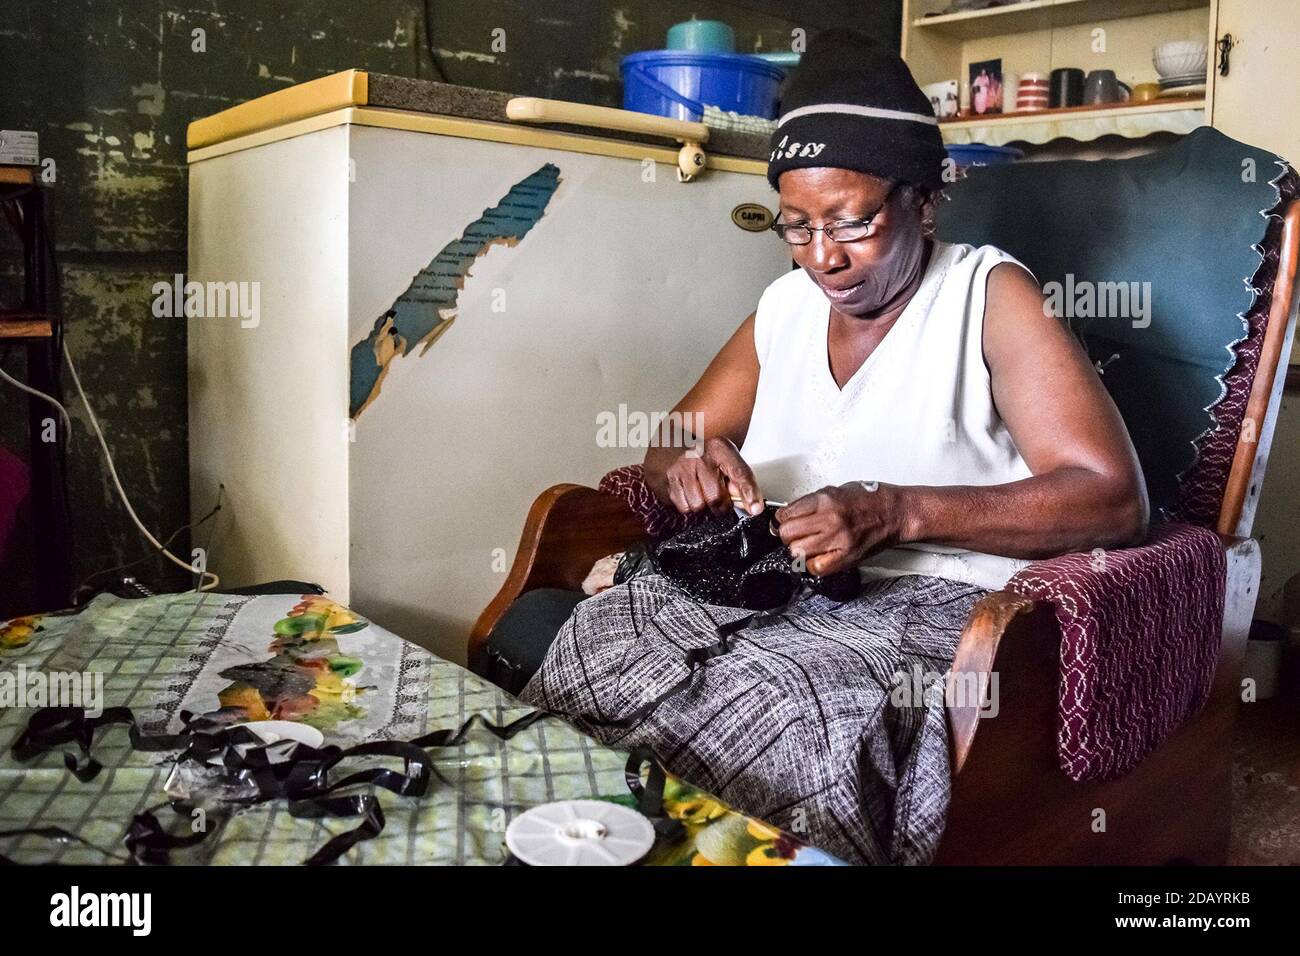 Sarah Hungwe, 67, crochets a bag using old cassette tapes as a part of Friendship Bench, a project to help depression in Harare, Zimbabwe. Stock Photo